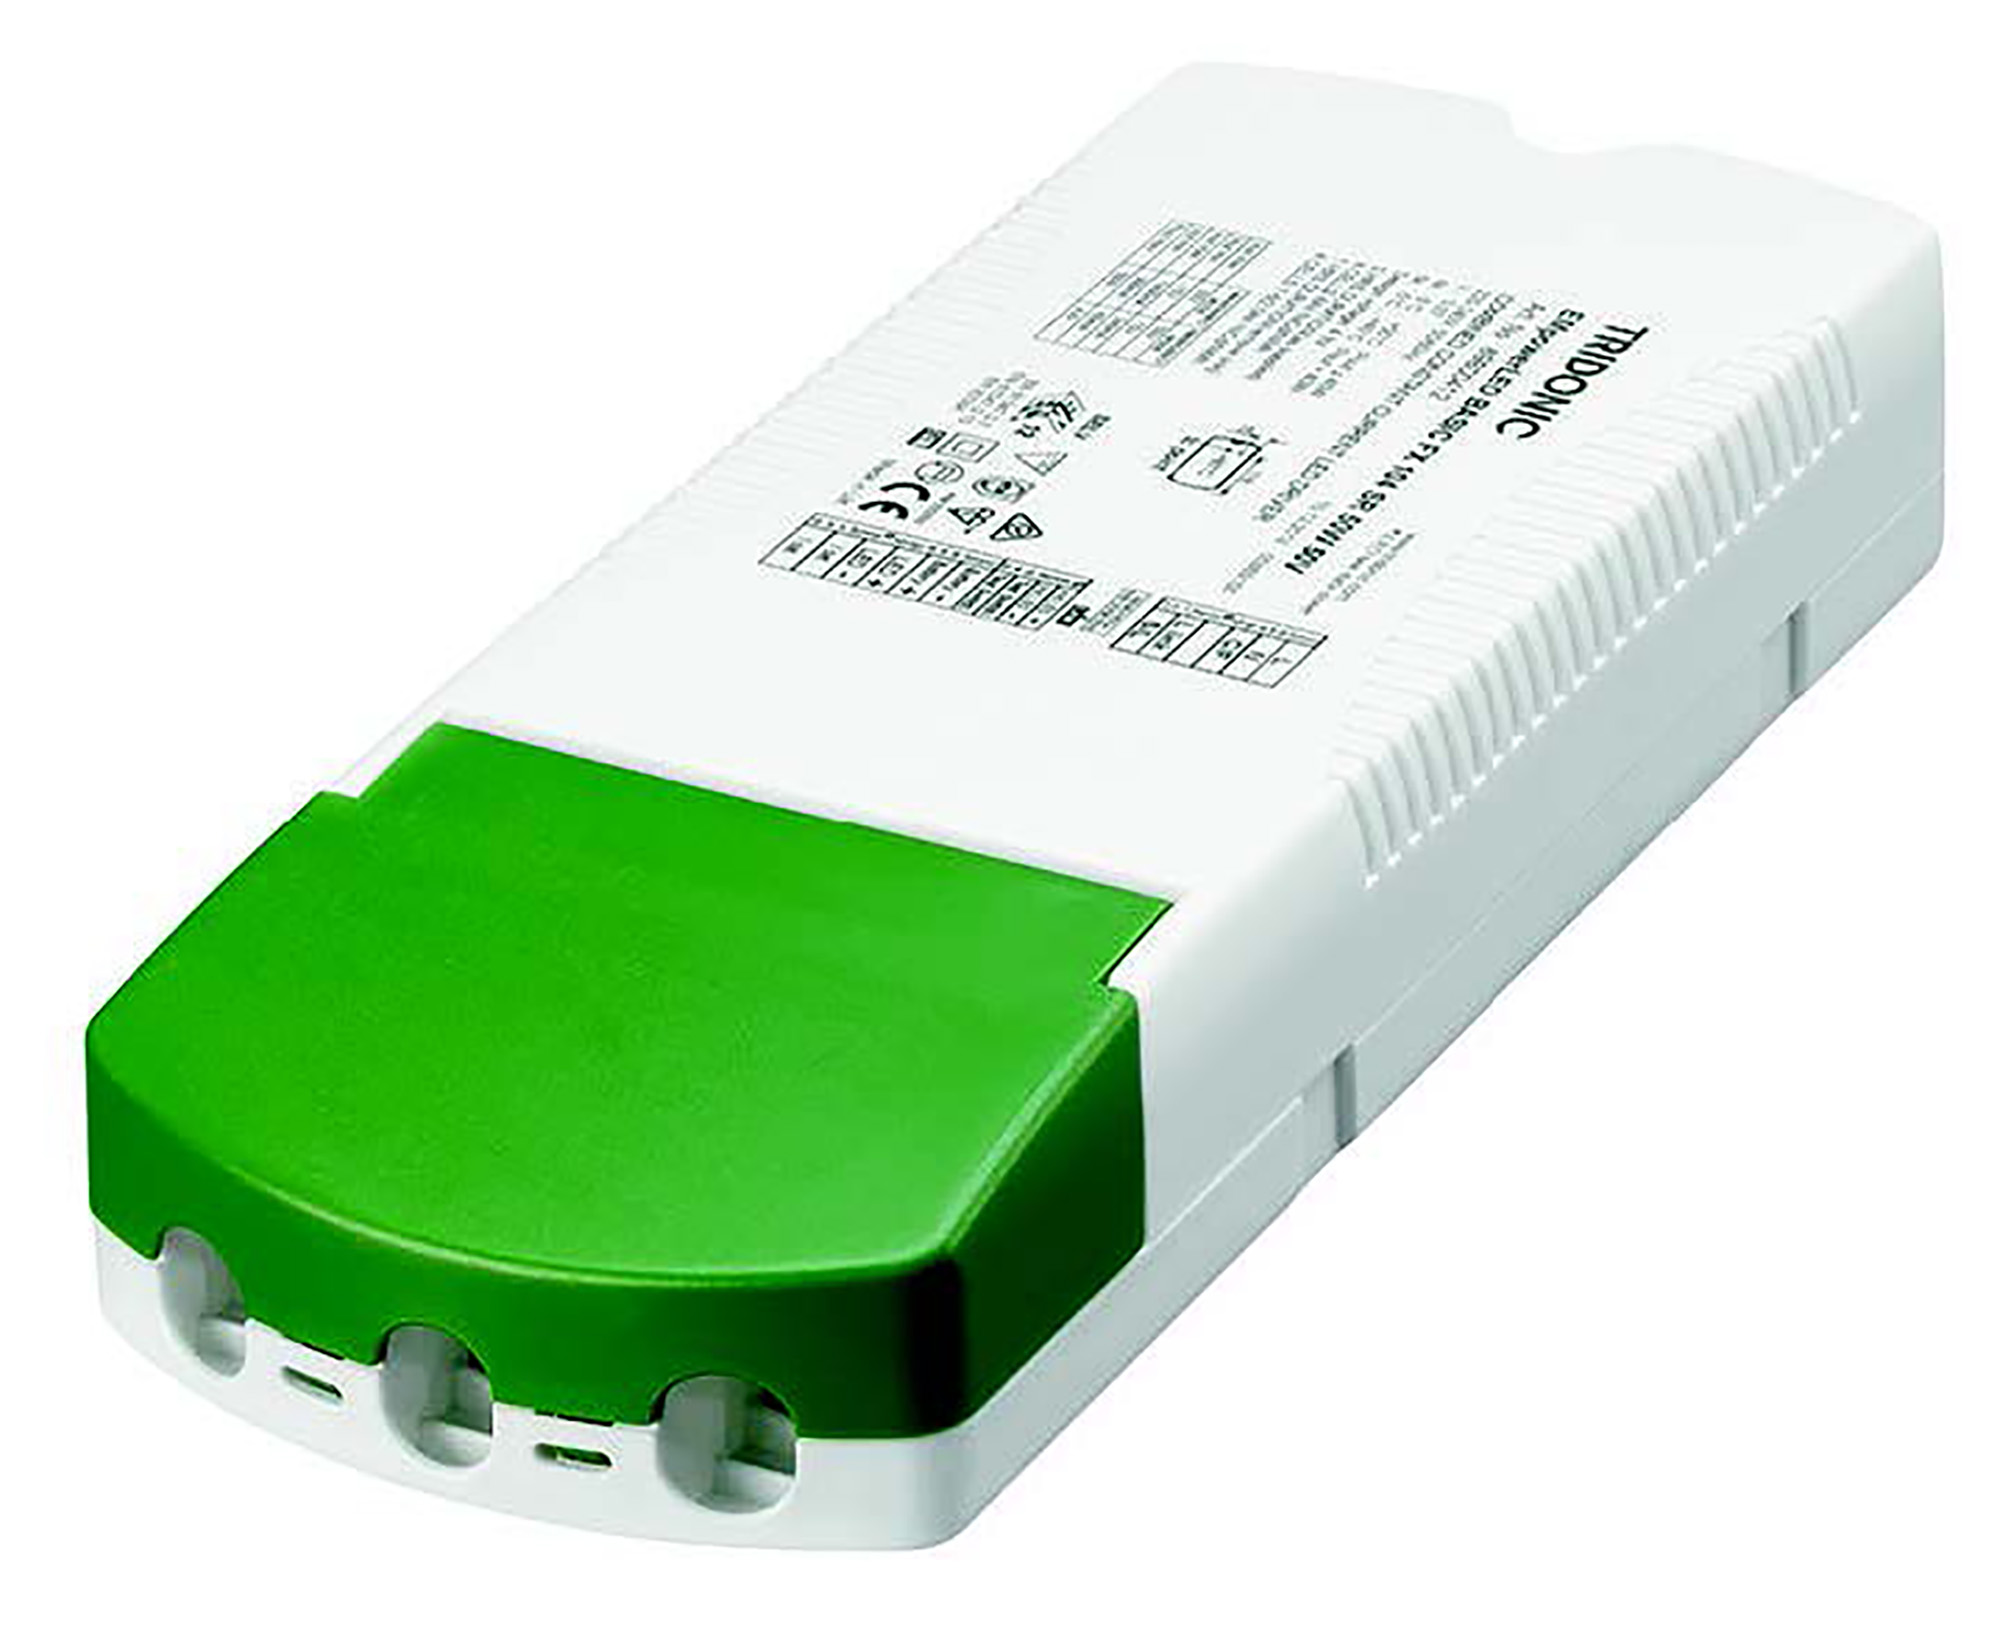 89800430  EMpowerLED 50W 50V; Emergency Unit For Compact LED